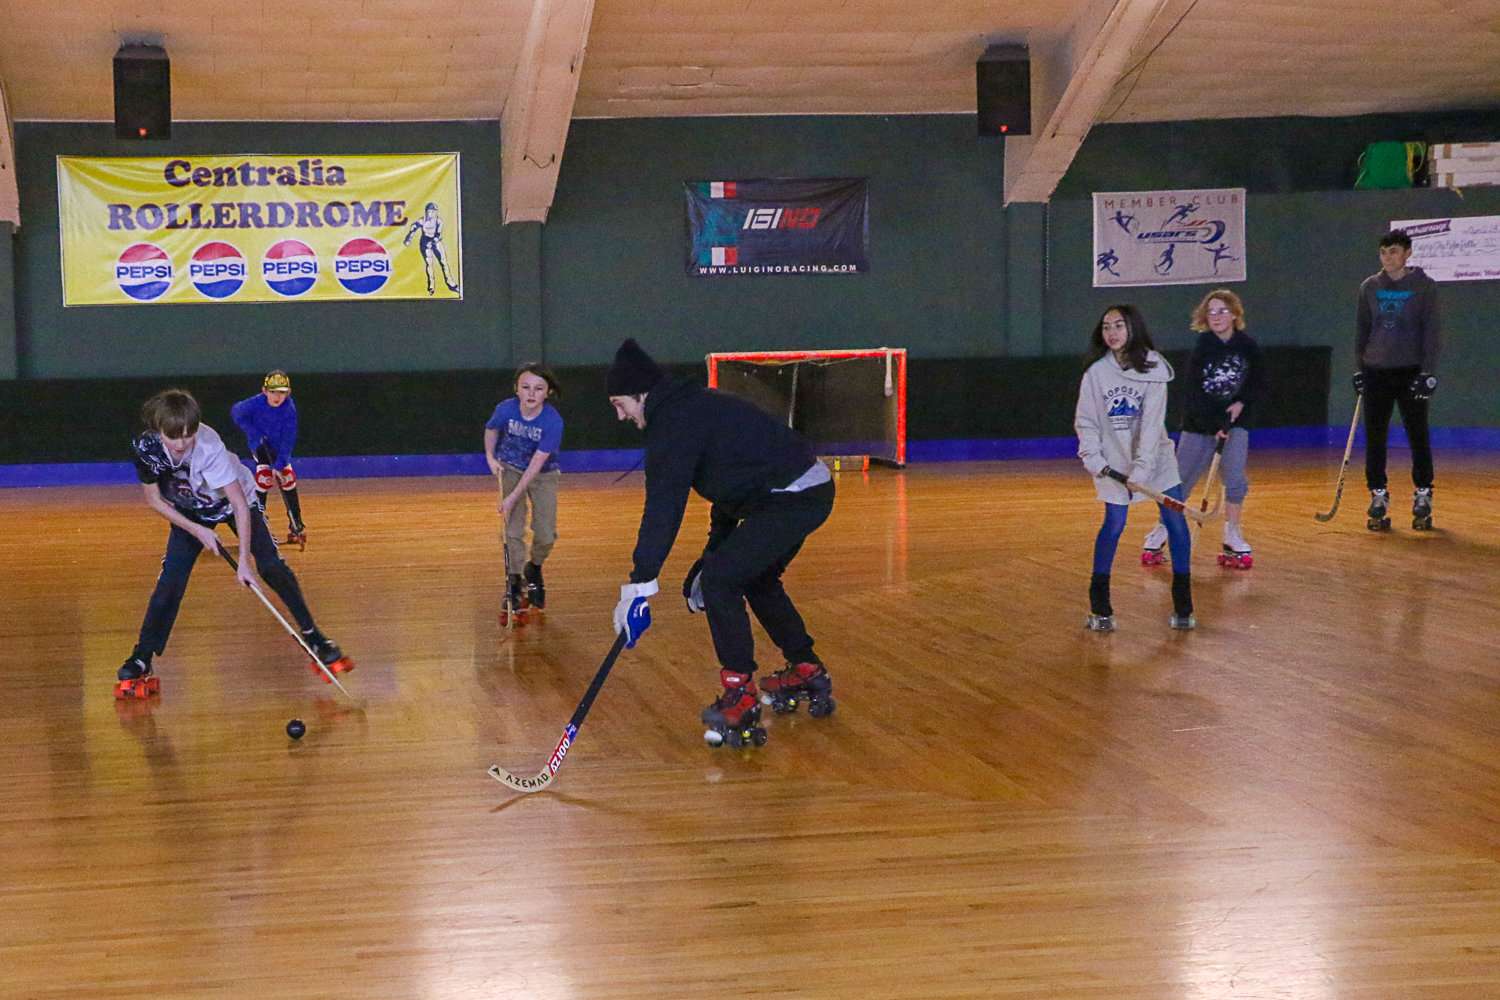 Members of the Centralia Sharks rollerhockey club participate in a scrimmage game at their weekly Saturday morning practice.